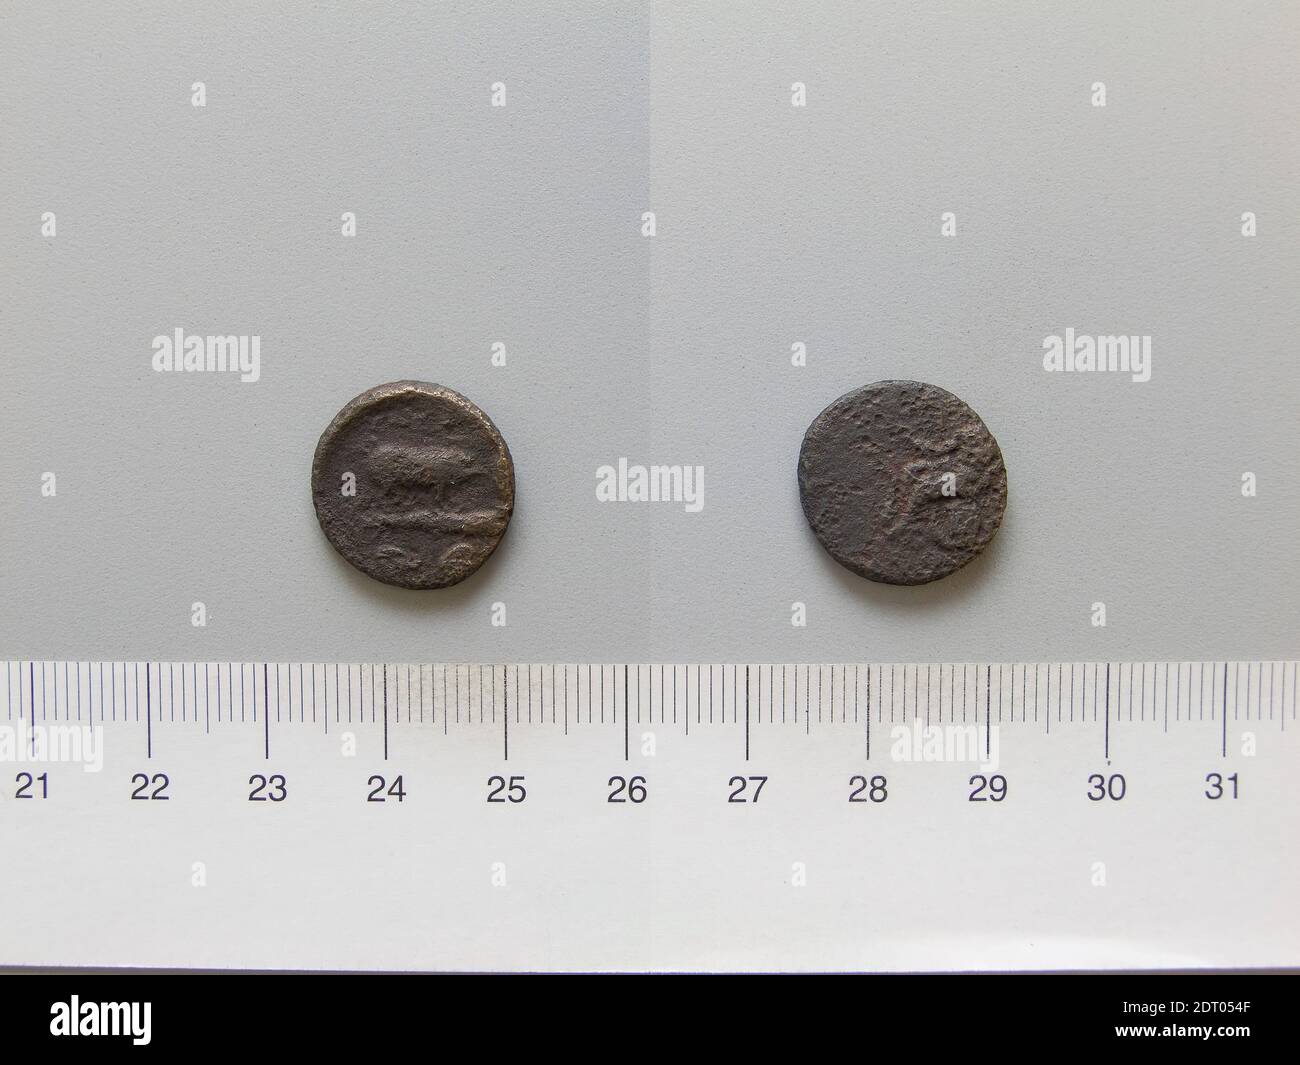 Mint: Eleusis, Coin from Eleusis, Bronze, 3.89 g, 17.1 mm, Made in Eleusis, Attica, Greek, Numismatics Stock Photo